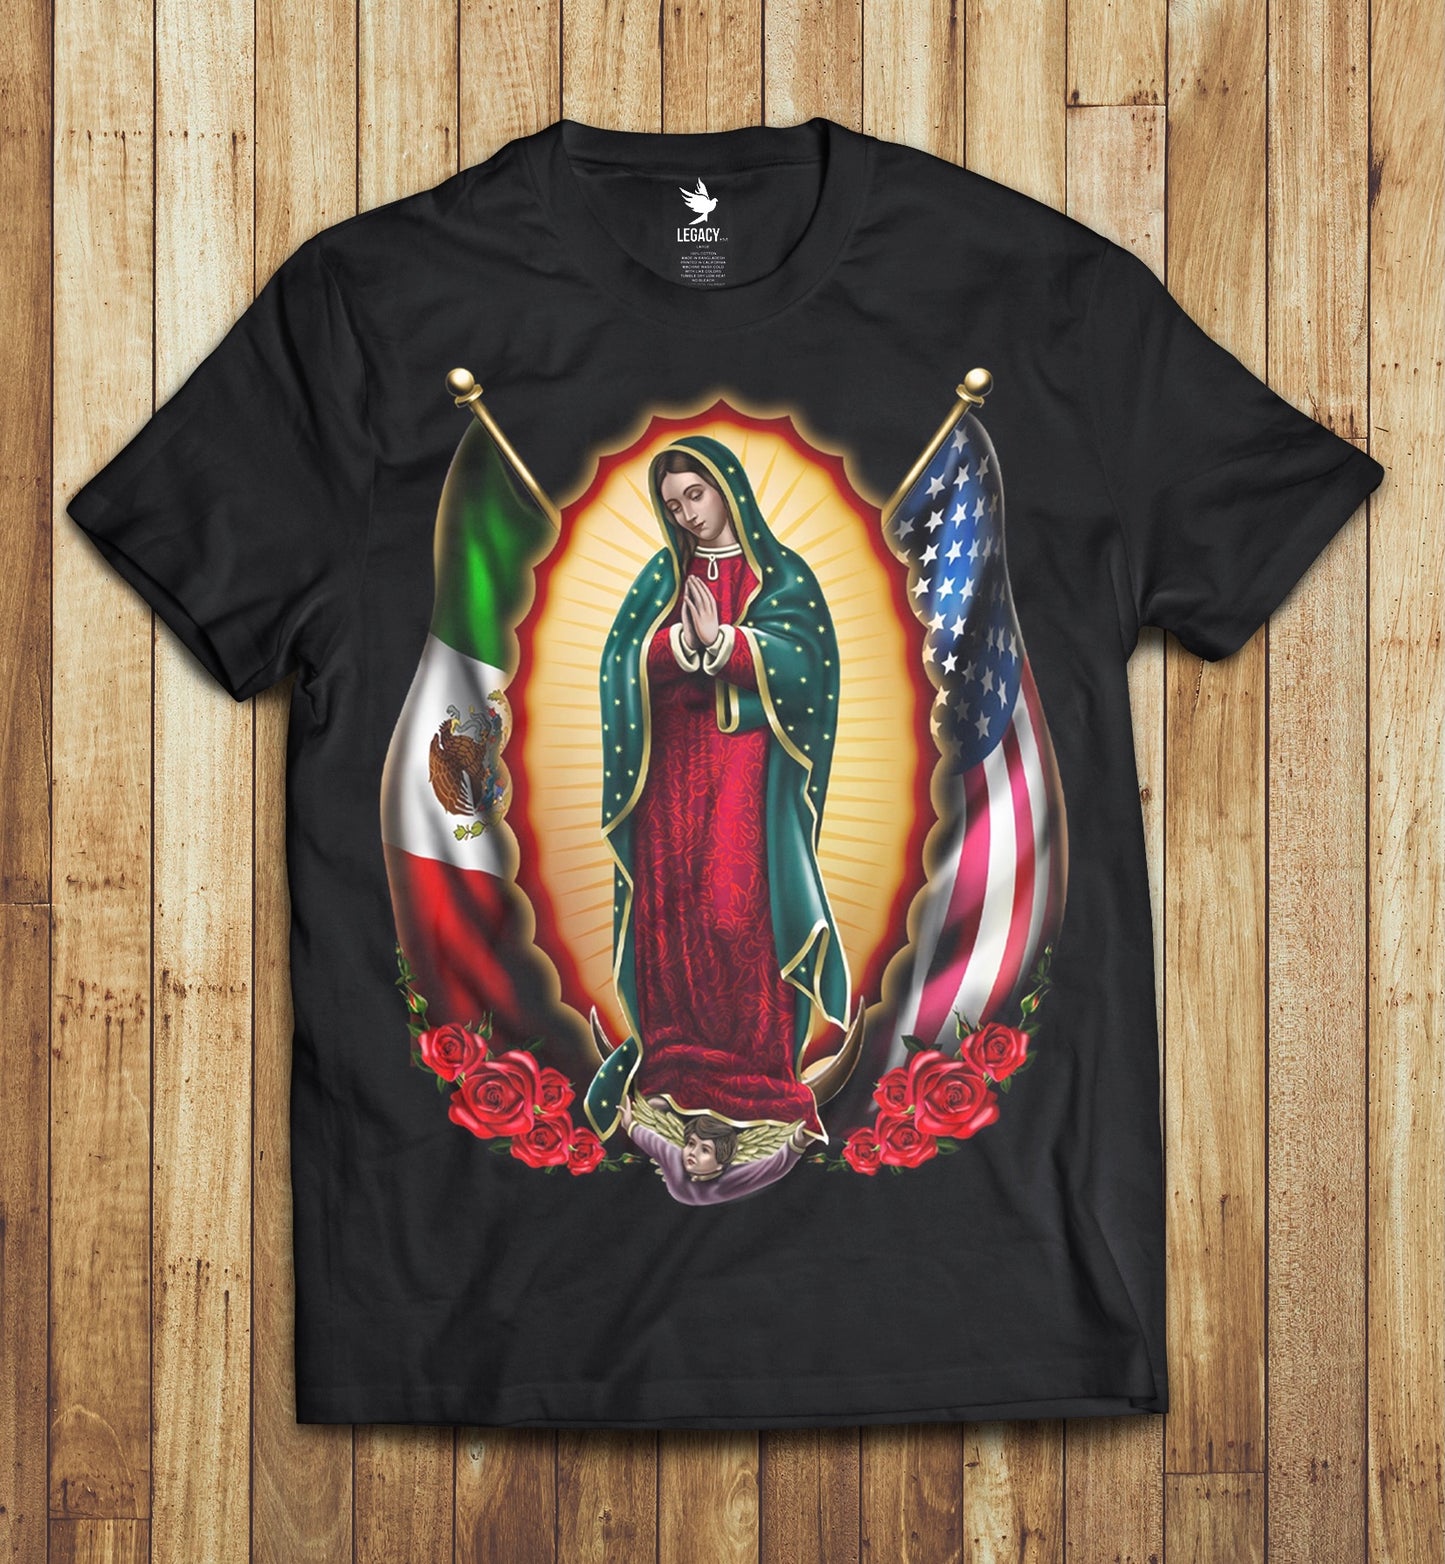 Our Lady of Guadalupe T-Shirt *USA/Mexico Edition*